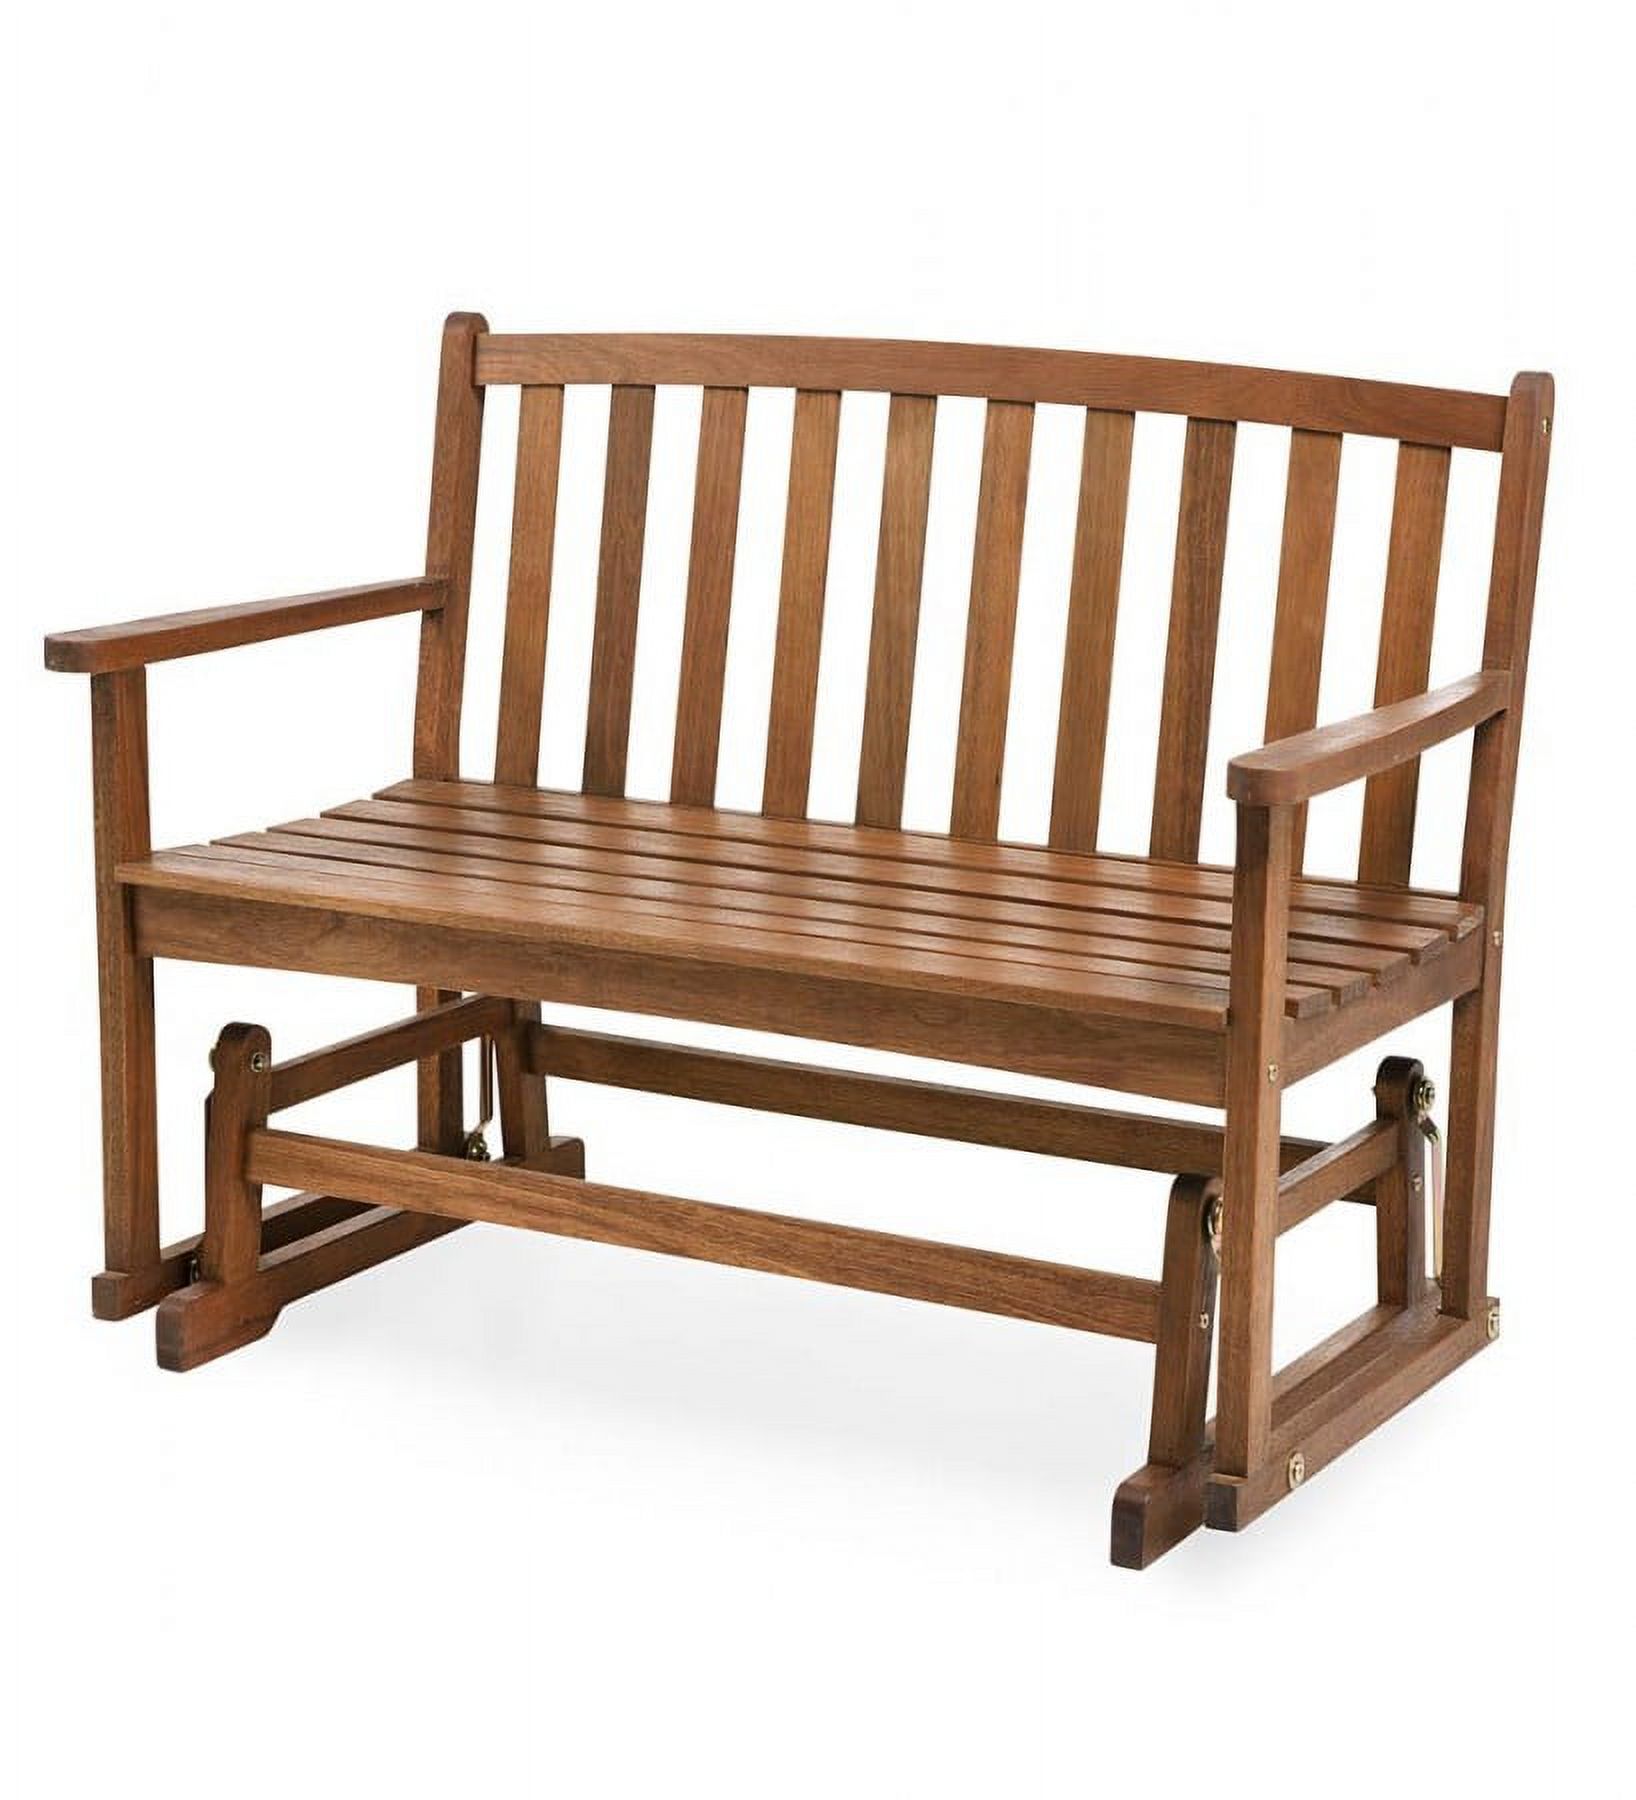 Plow & Hearth Eucalyptus Wood Love Seat Glider, Lancaster Outdoor Furniture Collection - Natural - image 1 of 2